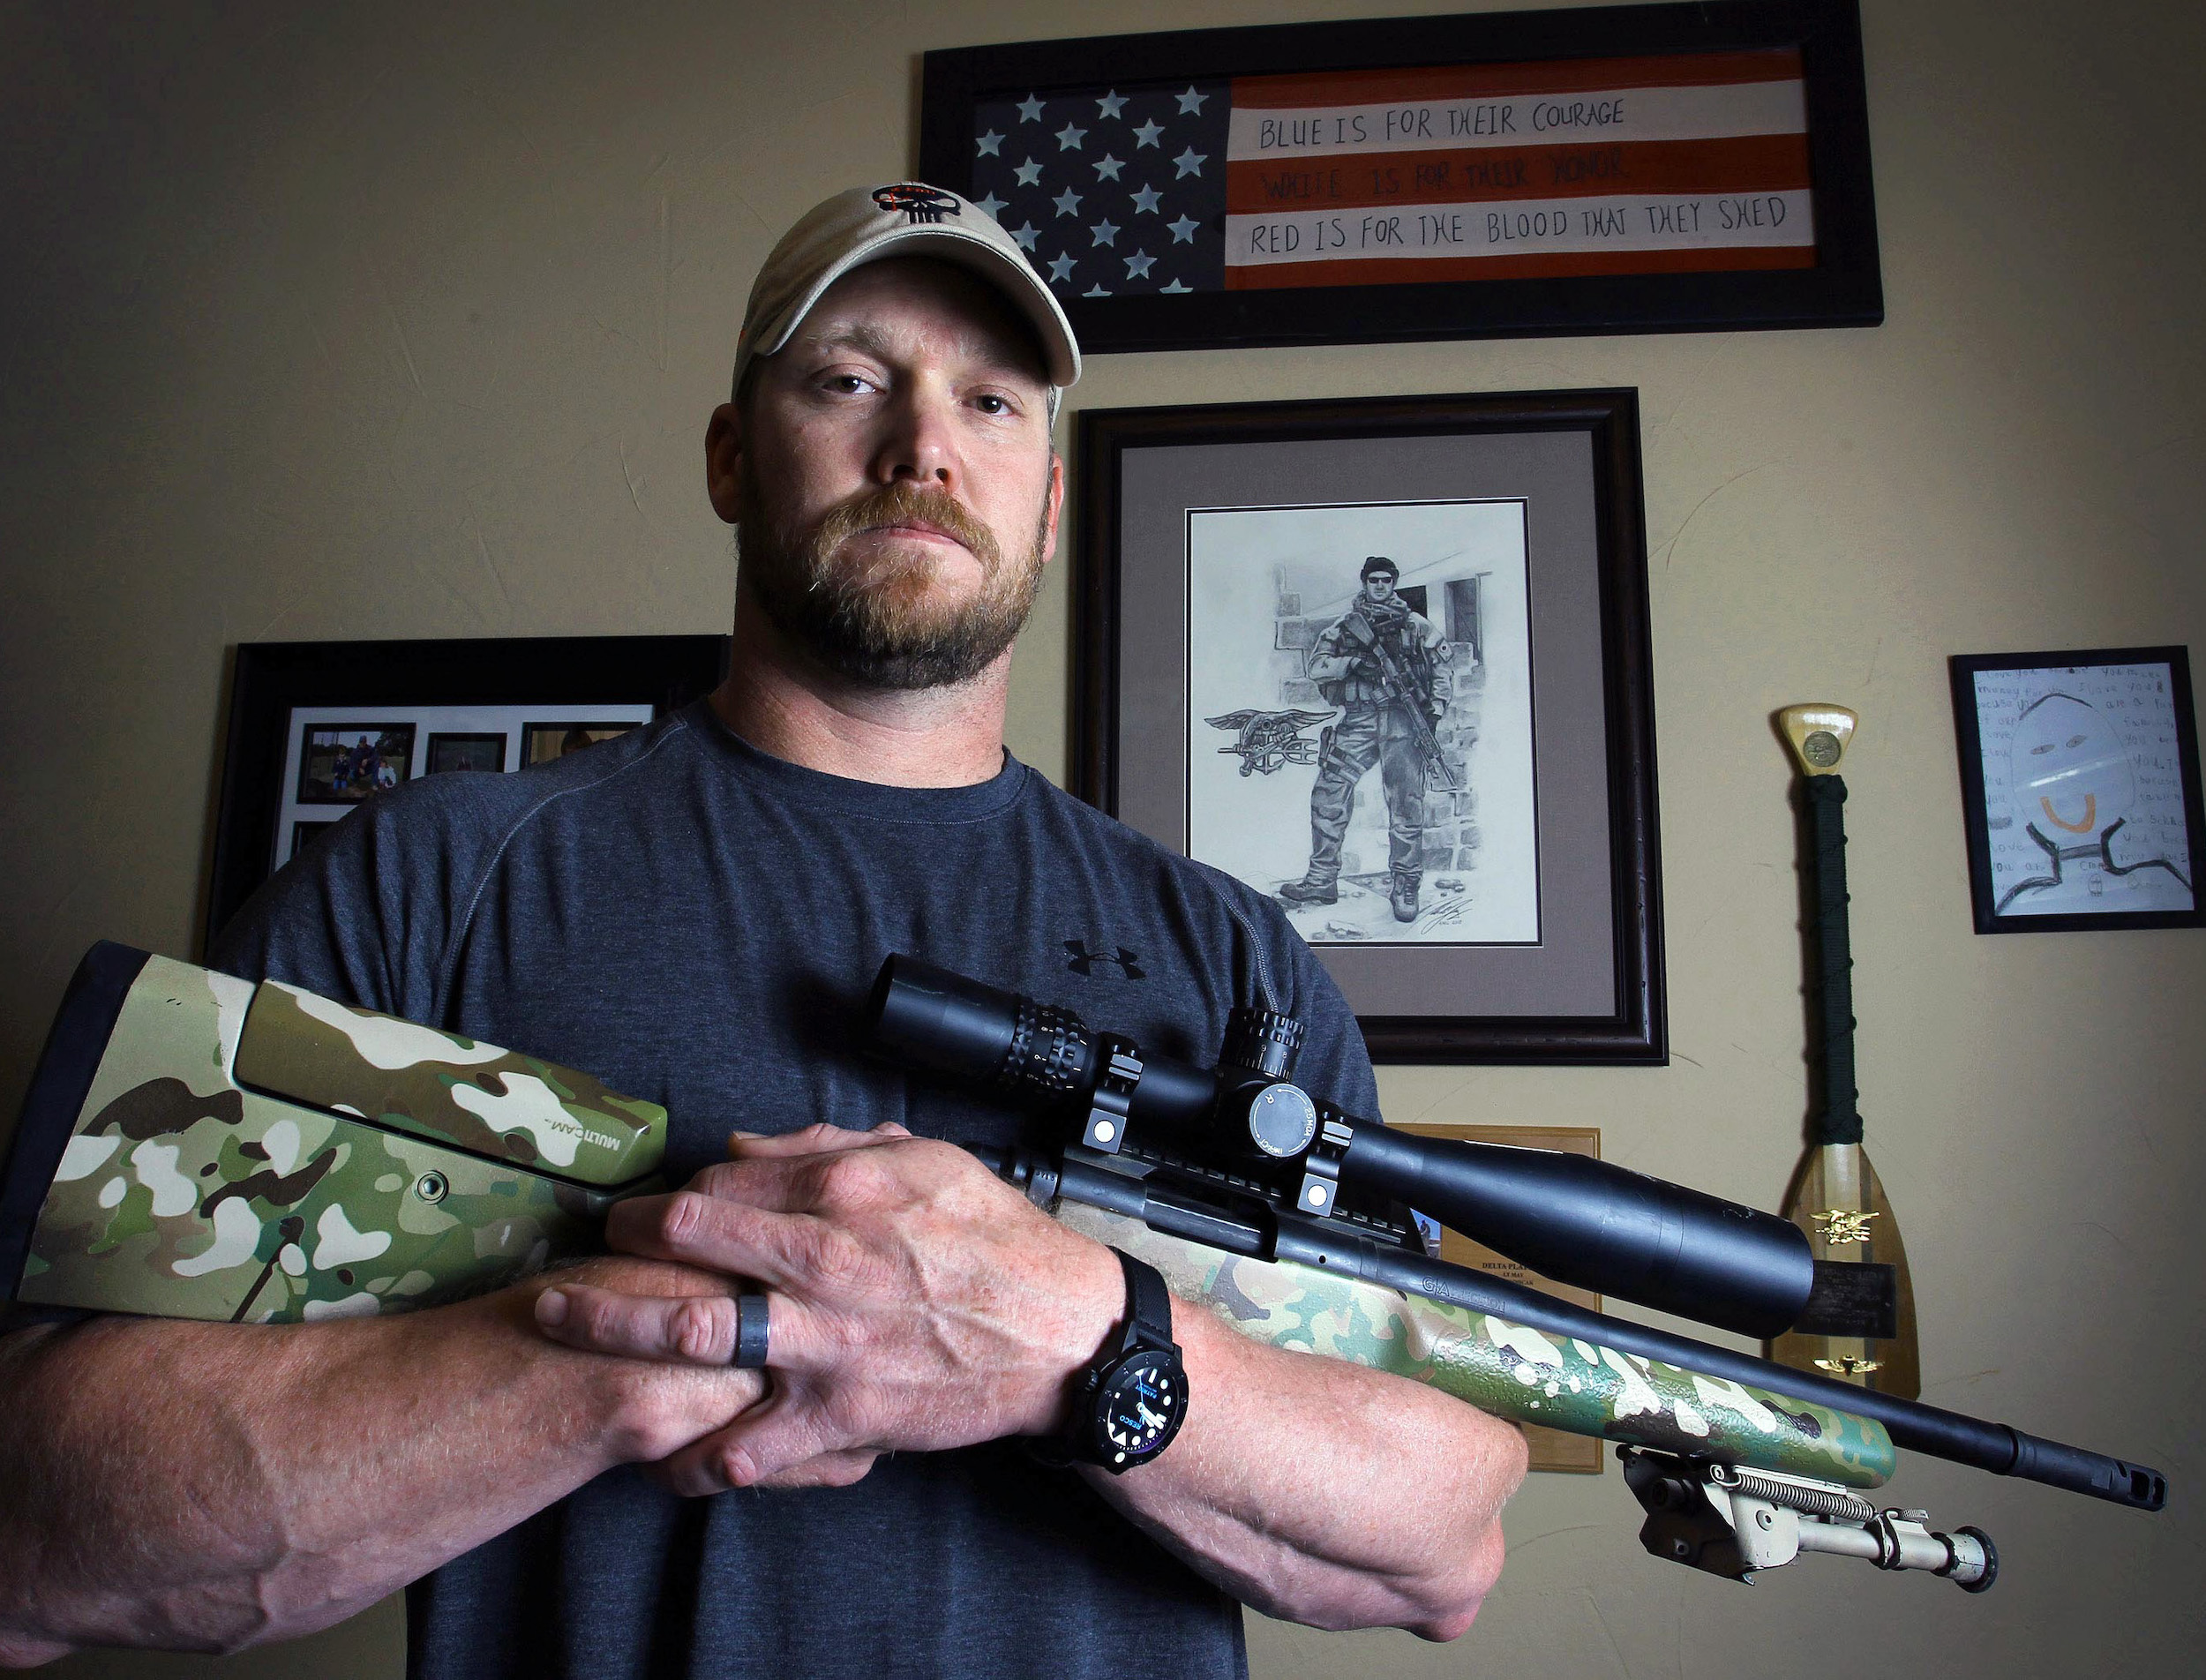 Chris Kyle, the true story of the American Sniper (1/3)